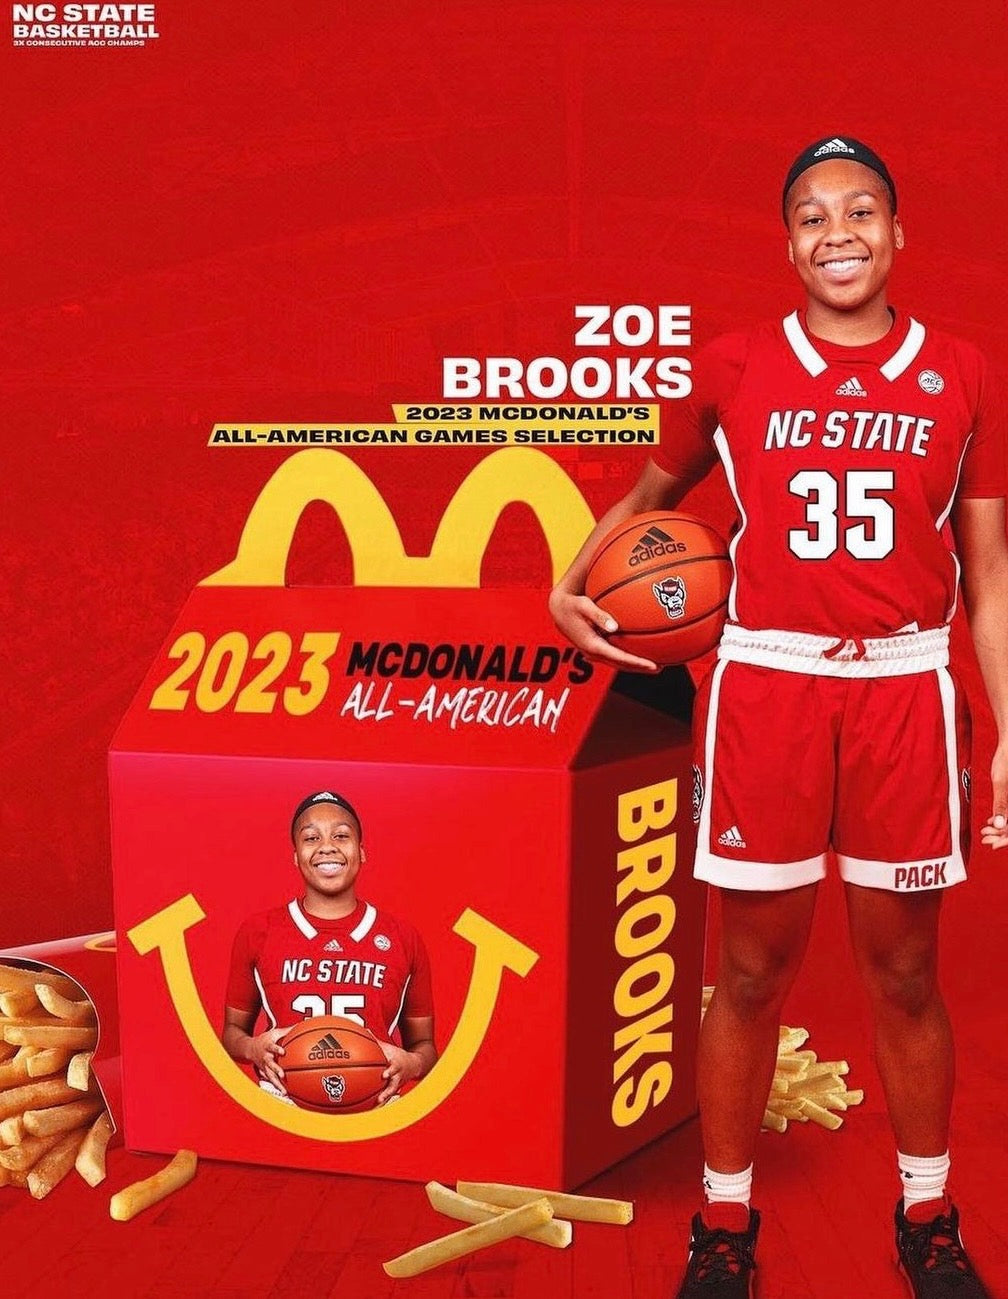 McDonald’s All-American & No.9 Player in the Country Zoe Brooks Taking Control of her Narrative